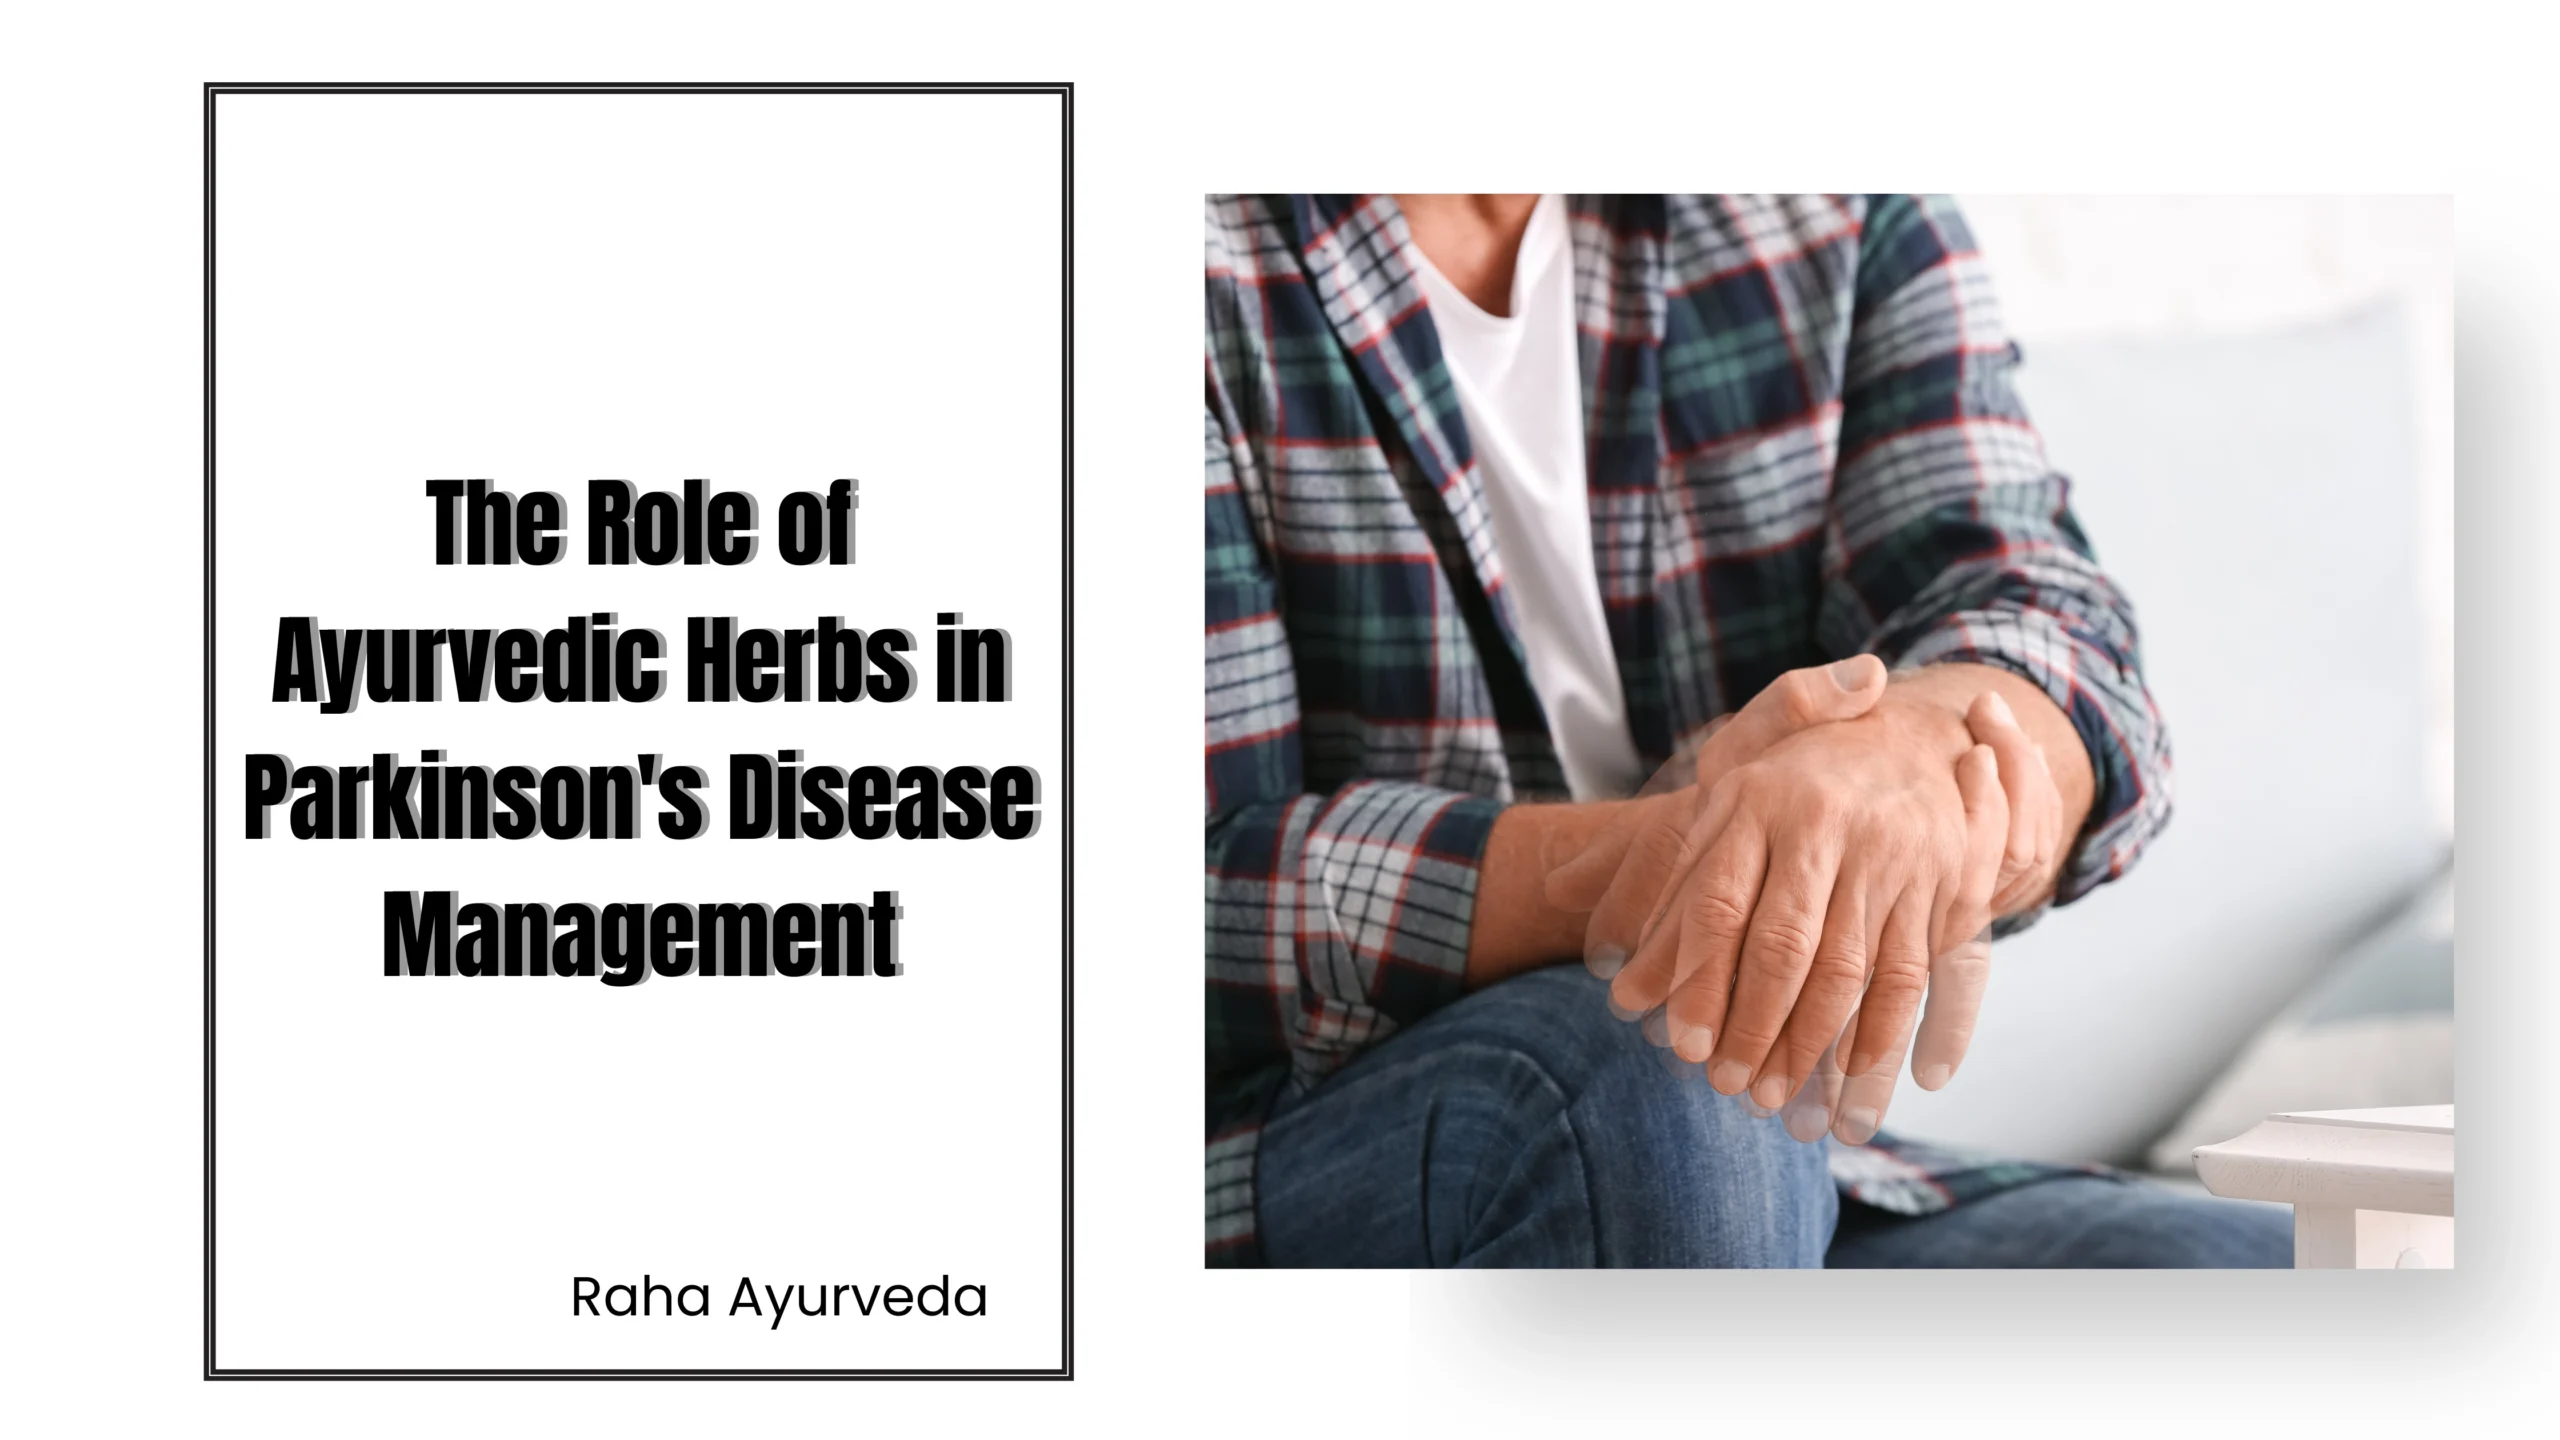 The Role of Ayurvedic Herbs in Parkinson’s Disease Management